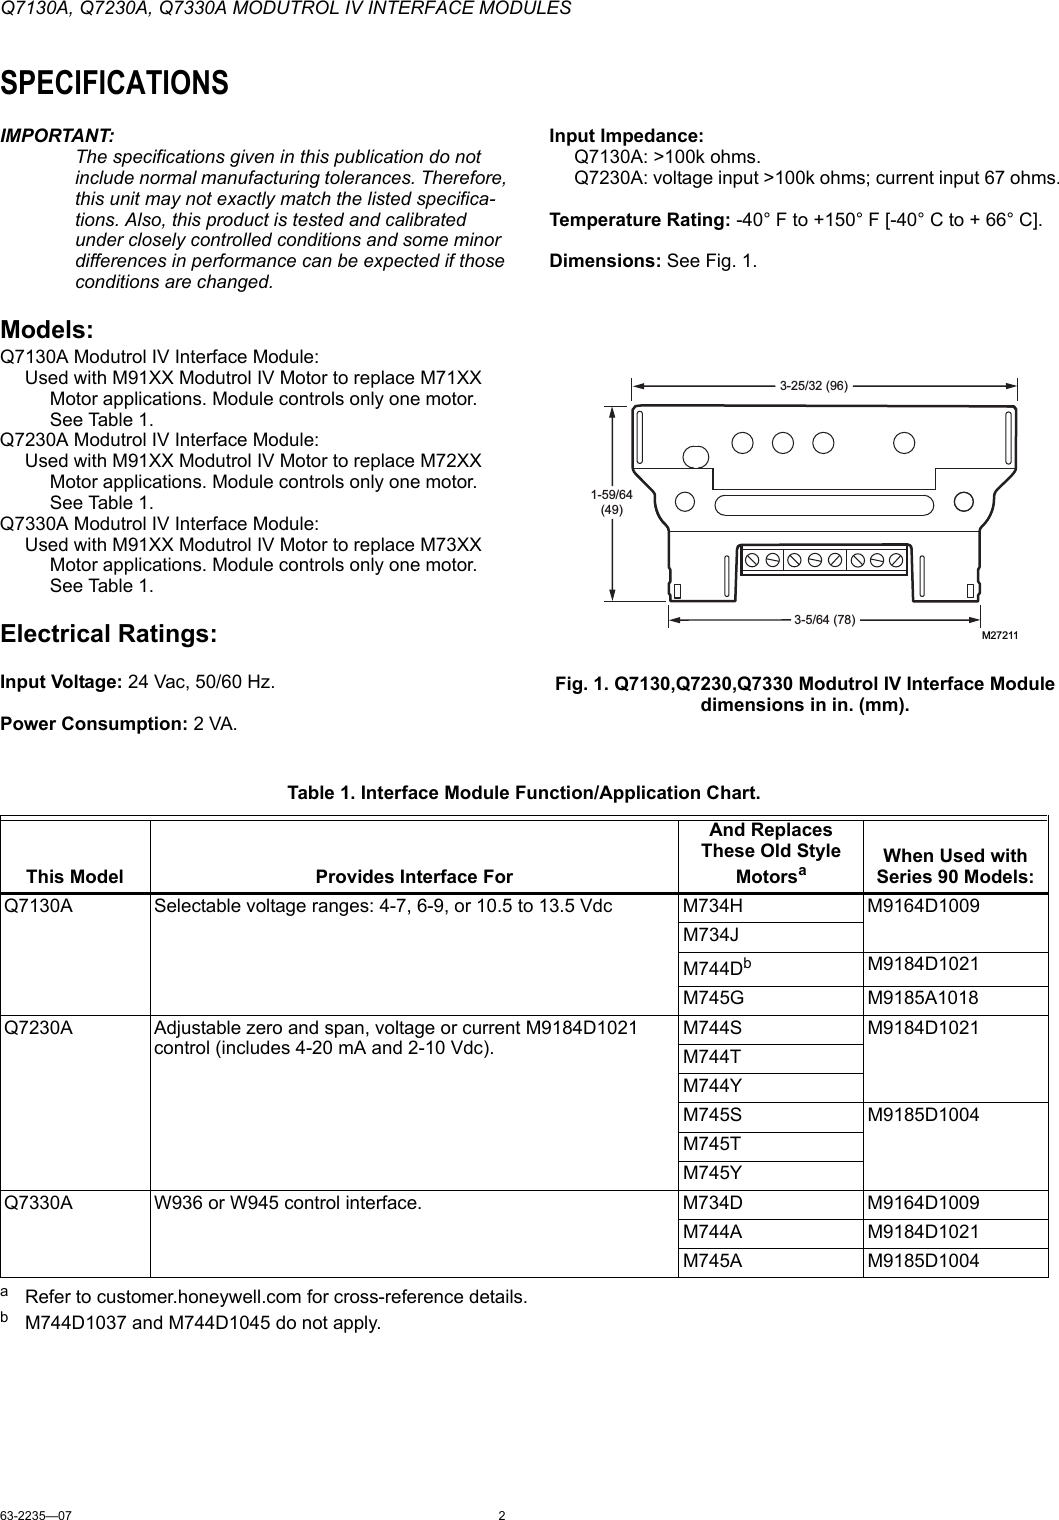 Page 2 of 8 - 63-2235_D Q7130A, Q7230A, Q7330AModutrol IV Interface Modules  Installation Directions